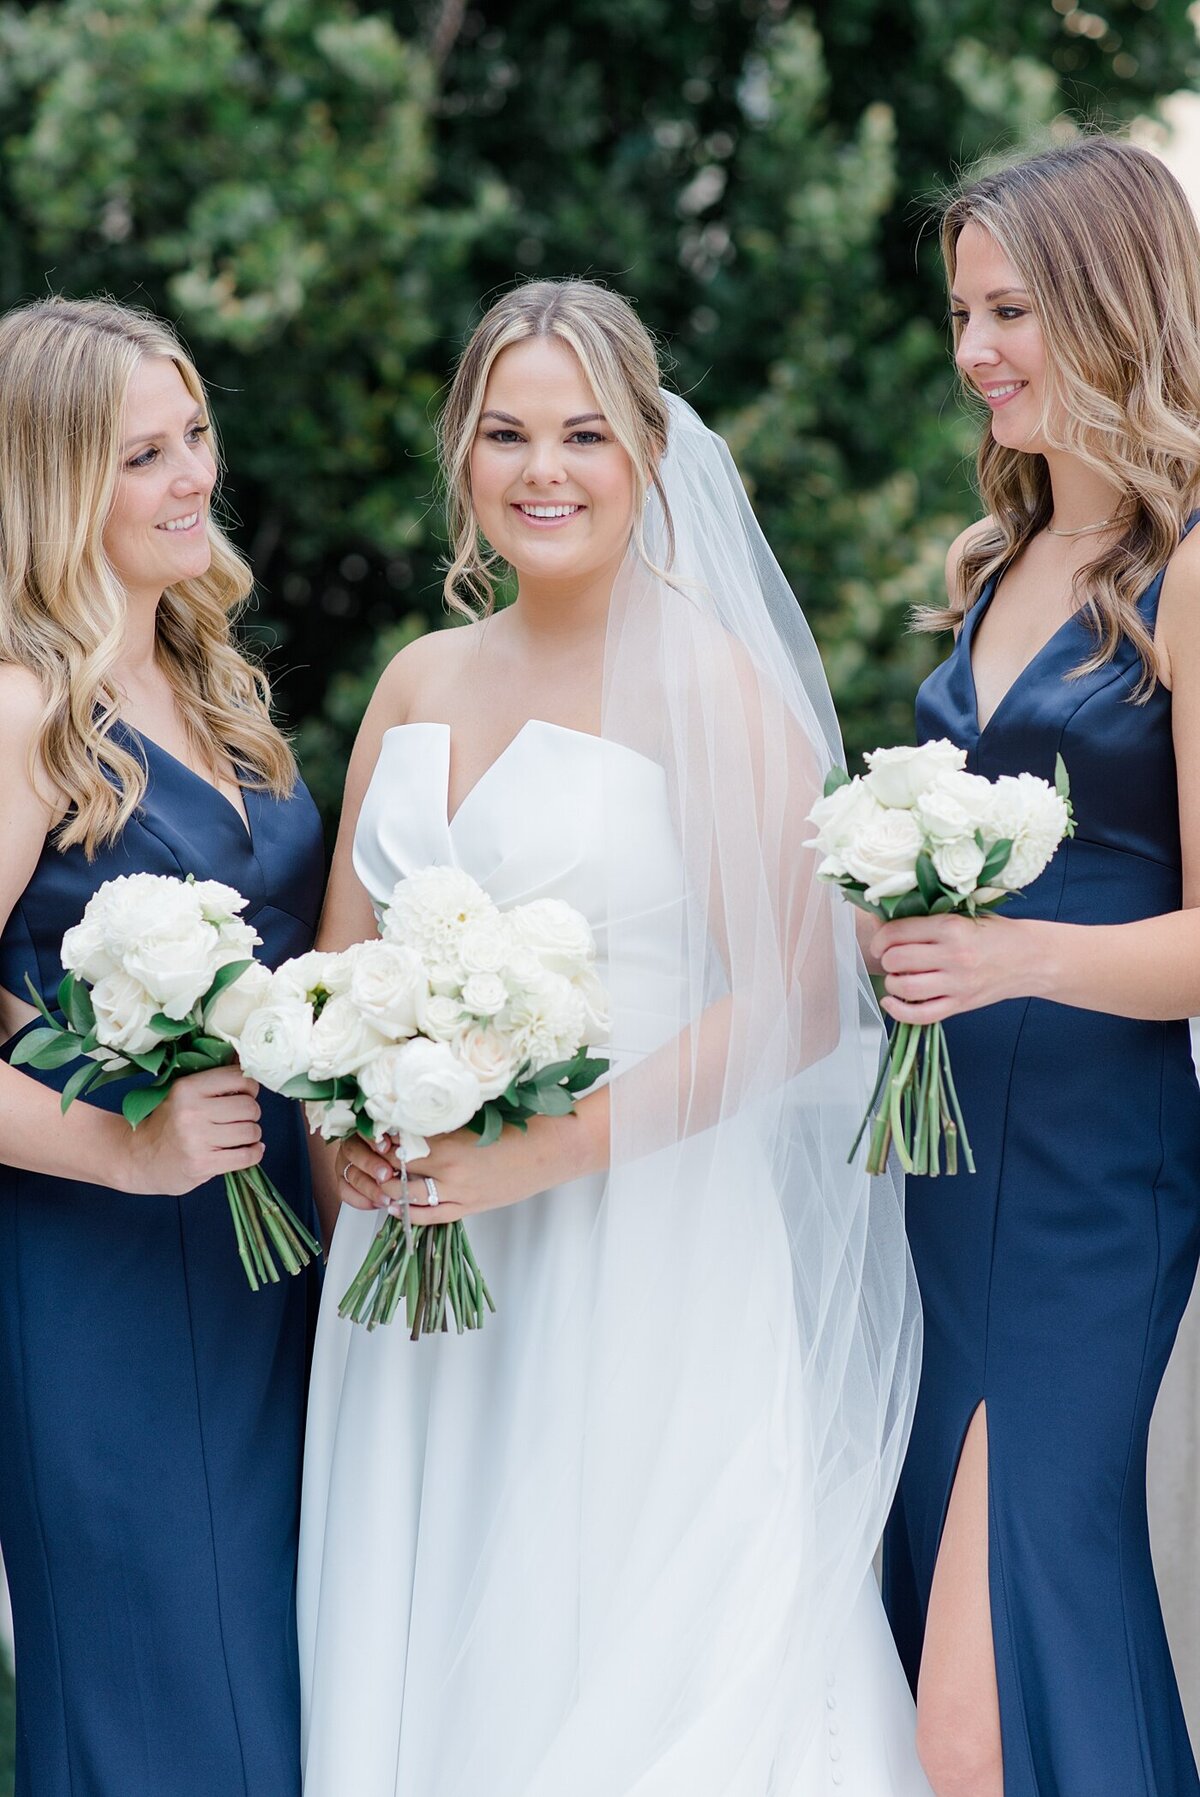 Bride smiling with bridesmaids in classic navy dresses photographed by Ohio Wedding Photographer